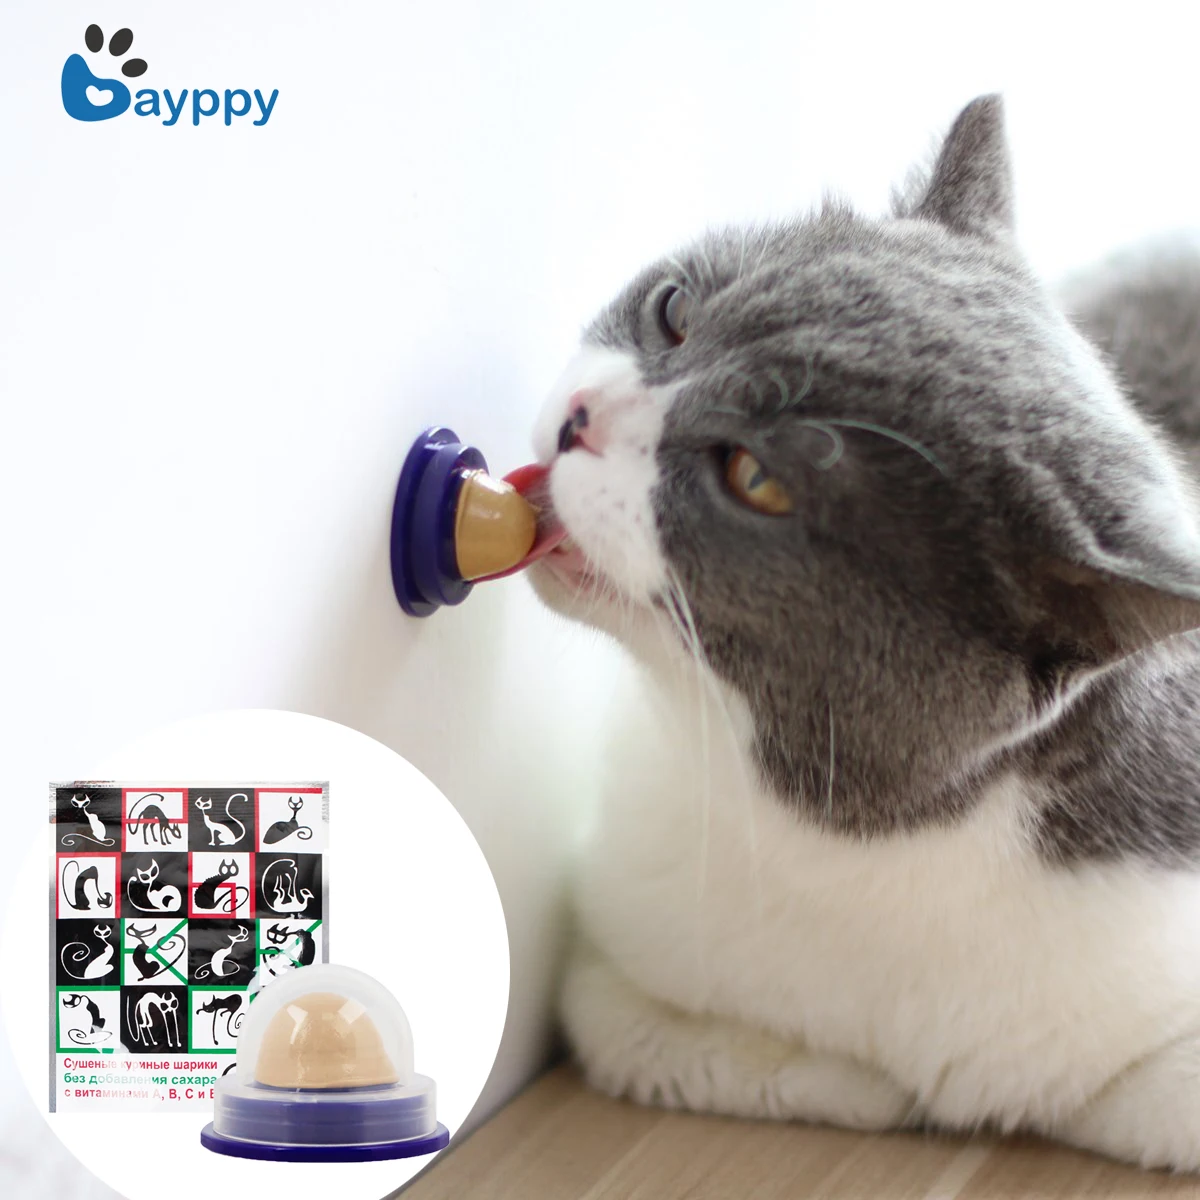 Topsale-ycld Healthy Cat Snacks Catnip Sugar Kitten Licking Solid Nutrition Energy Candy Ball Toy Bluish-purple